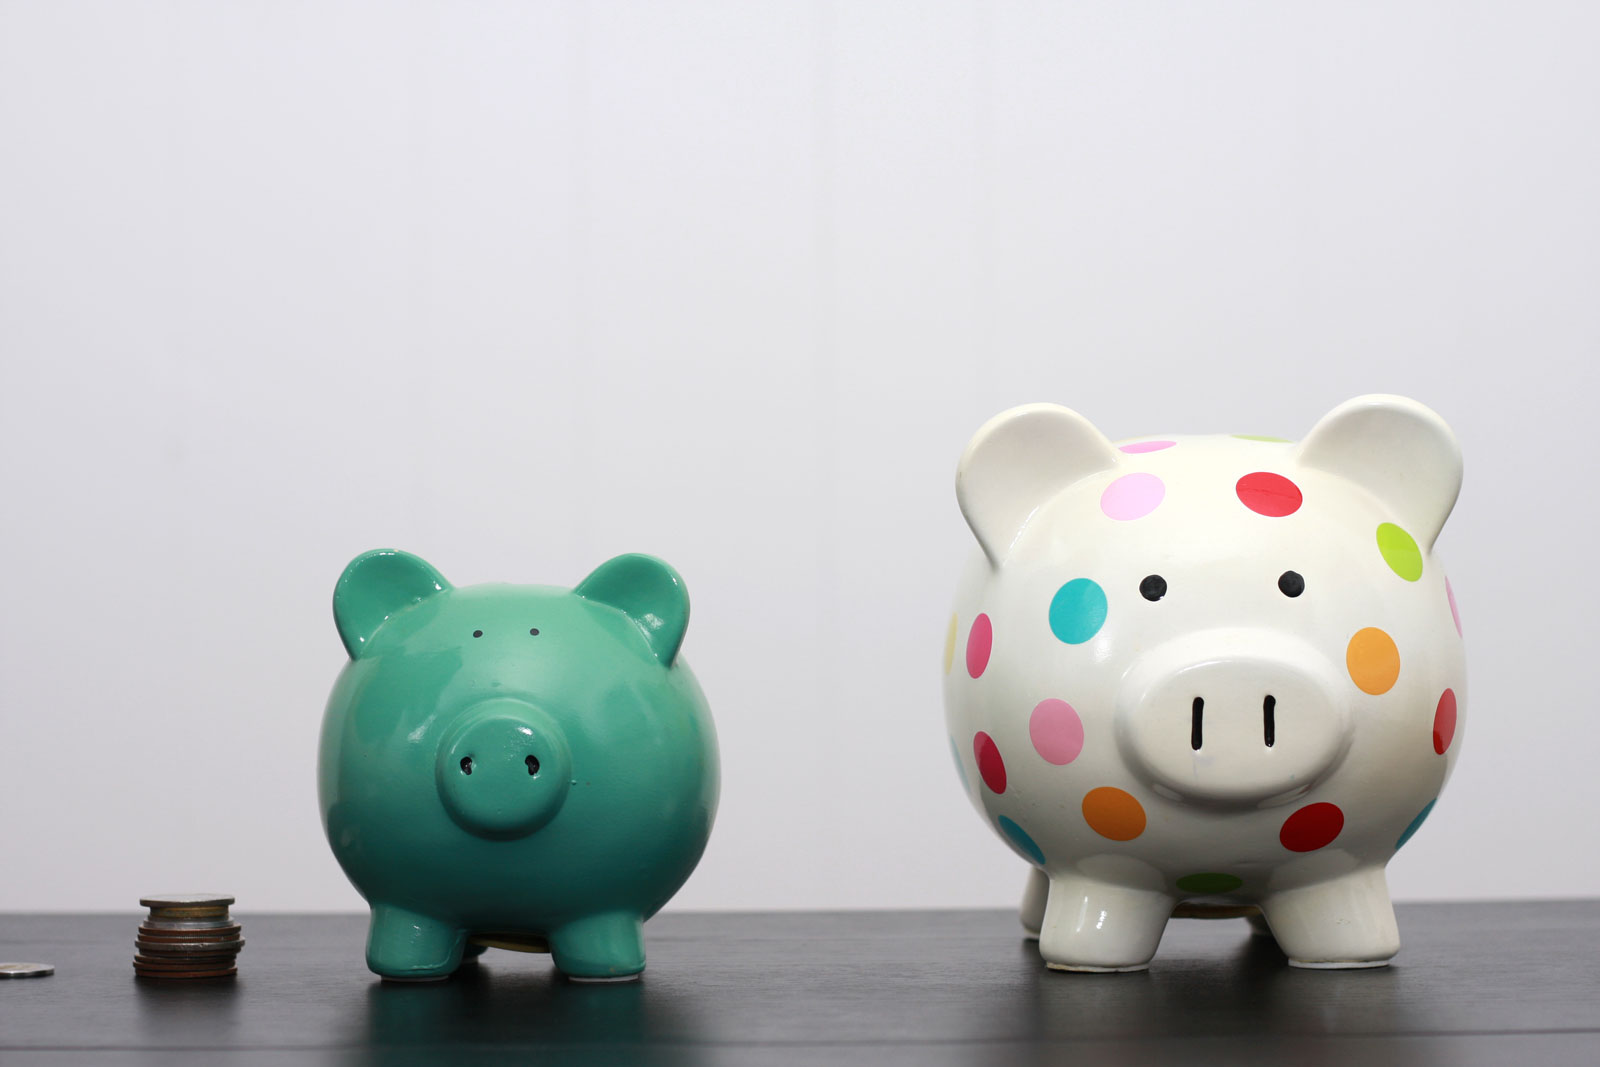 Two piggy banks, one is teal and one is white with polka dots. There is a stack of coins on the left.